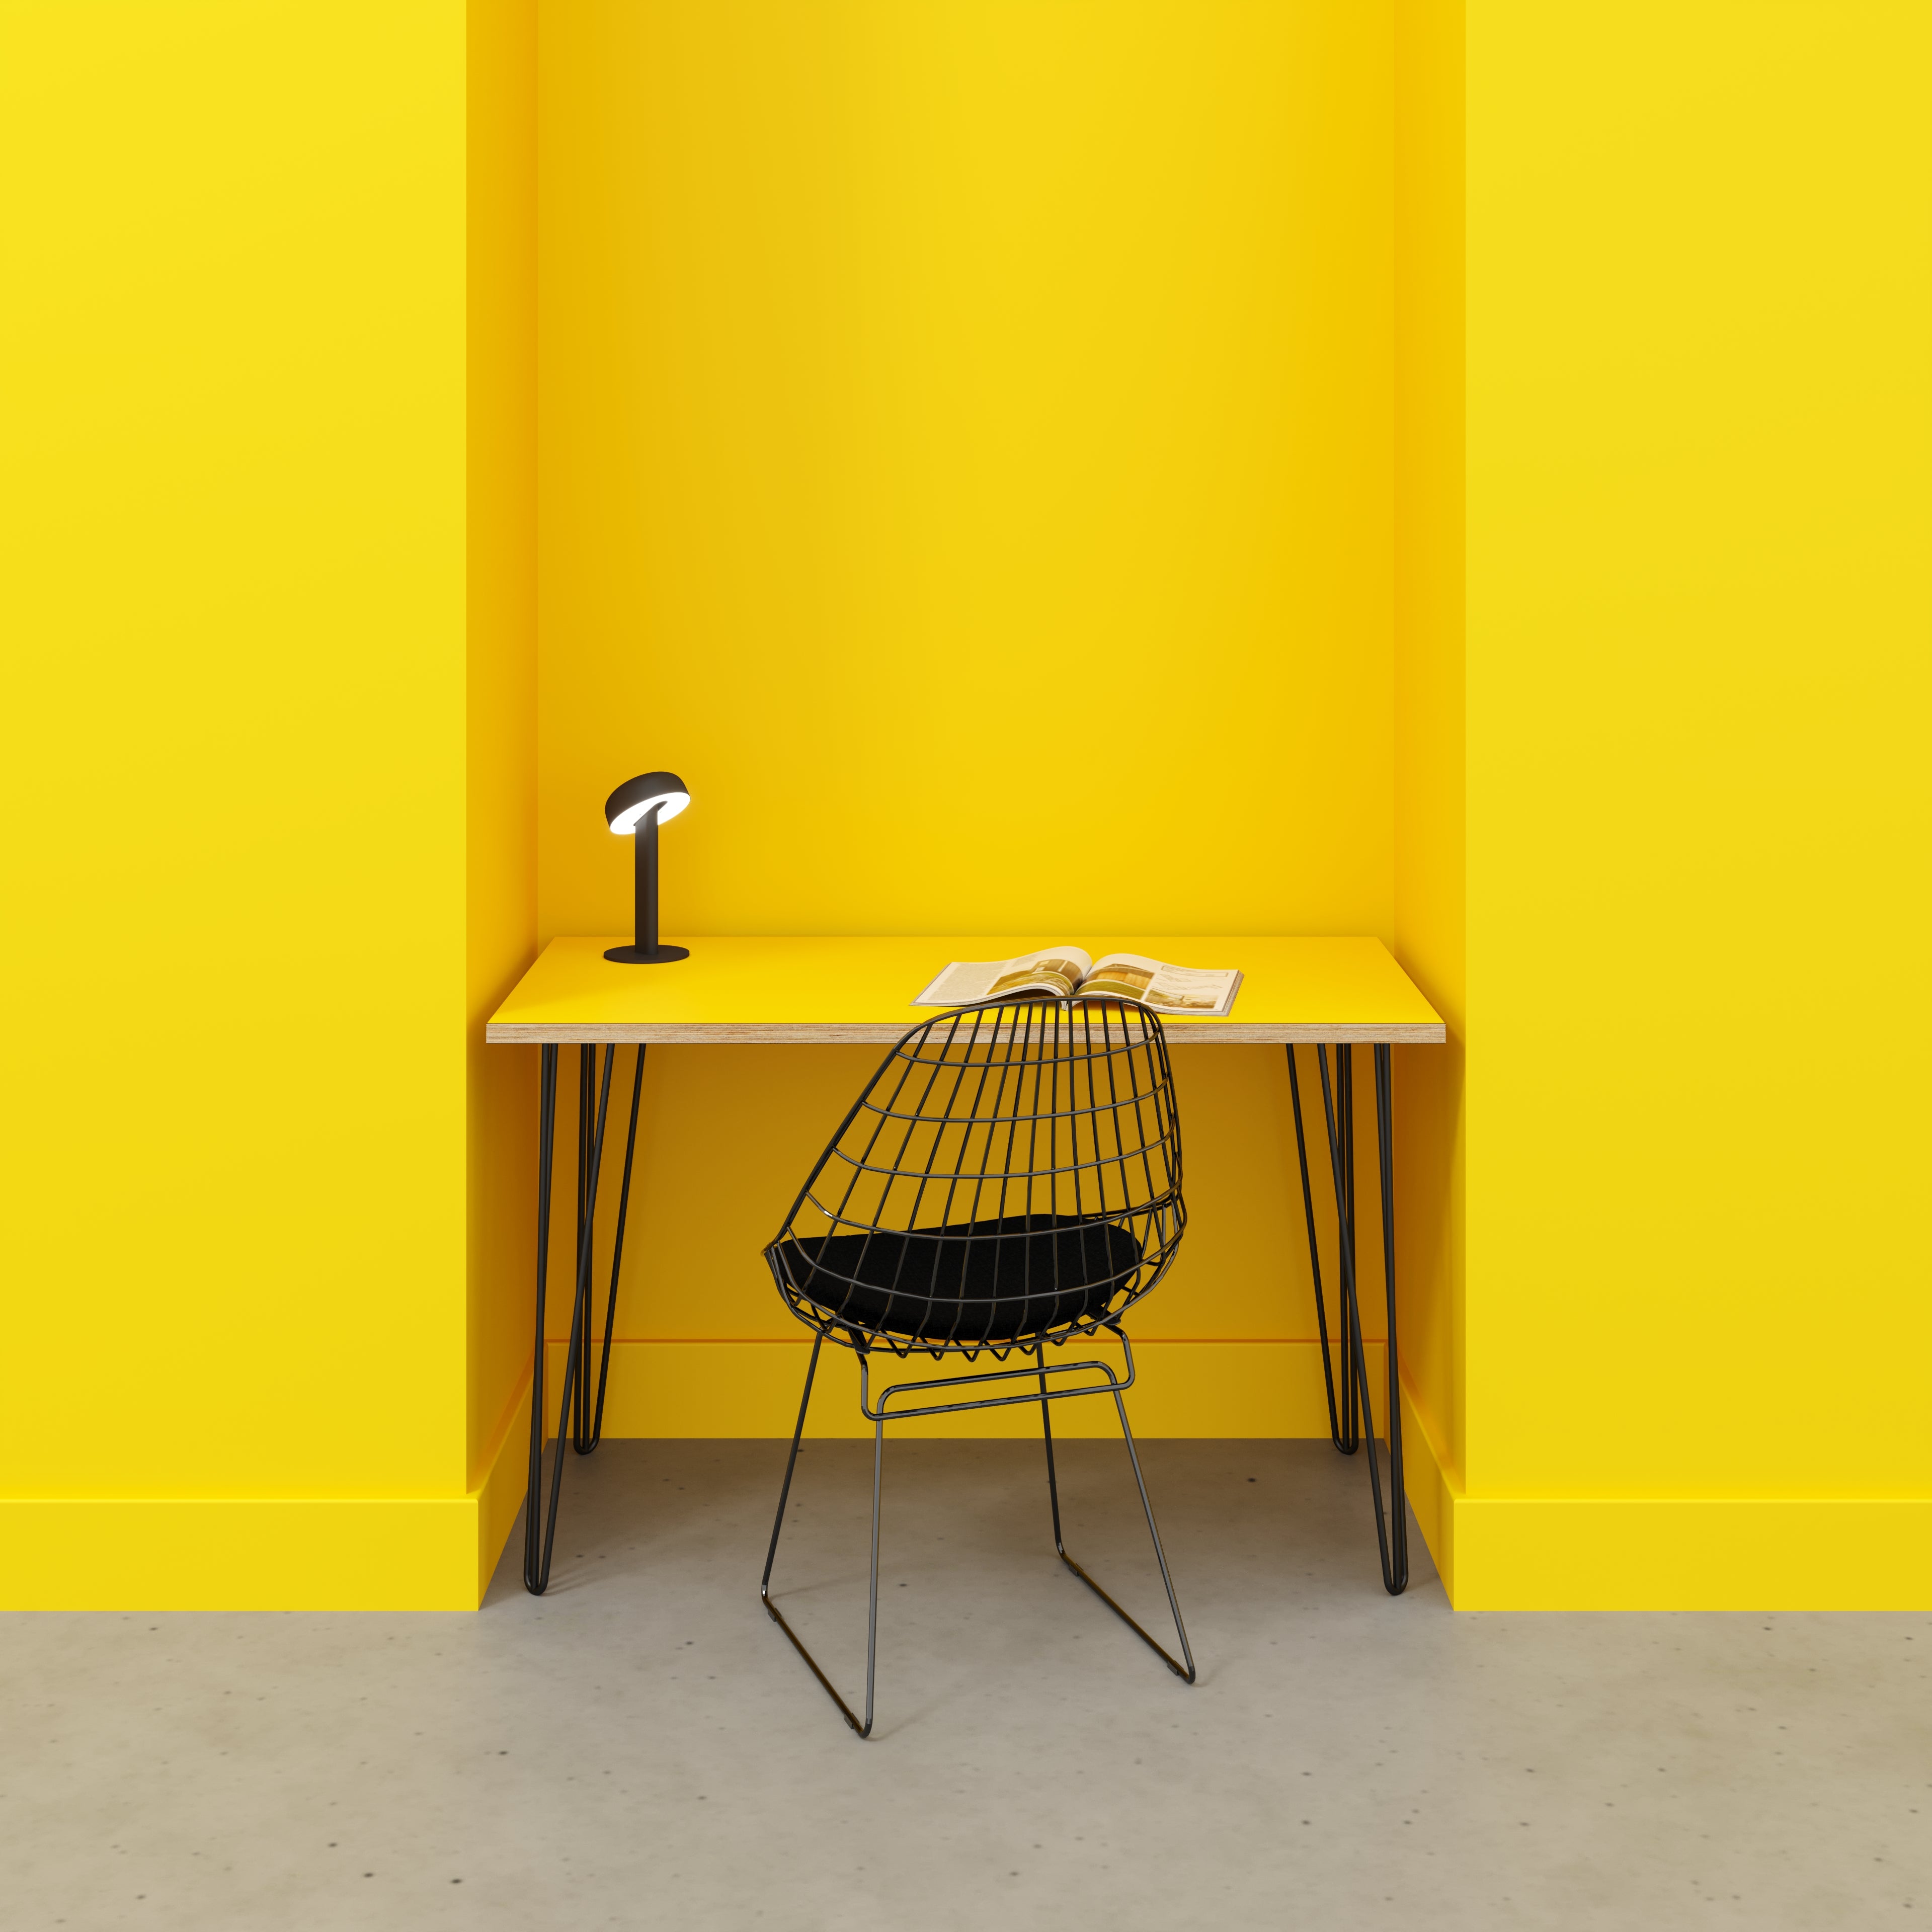 Desk with Black Hairpin Legs - Formica Chrome Yellow - 1200(w) x 600(d) x 735(h)